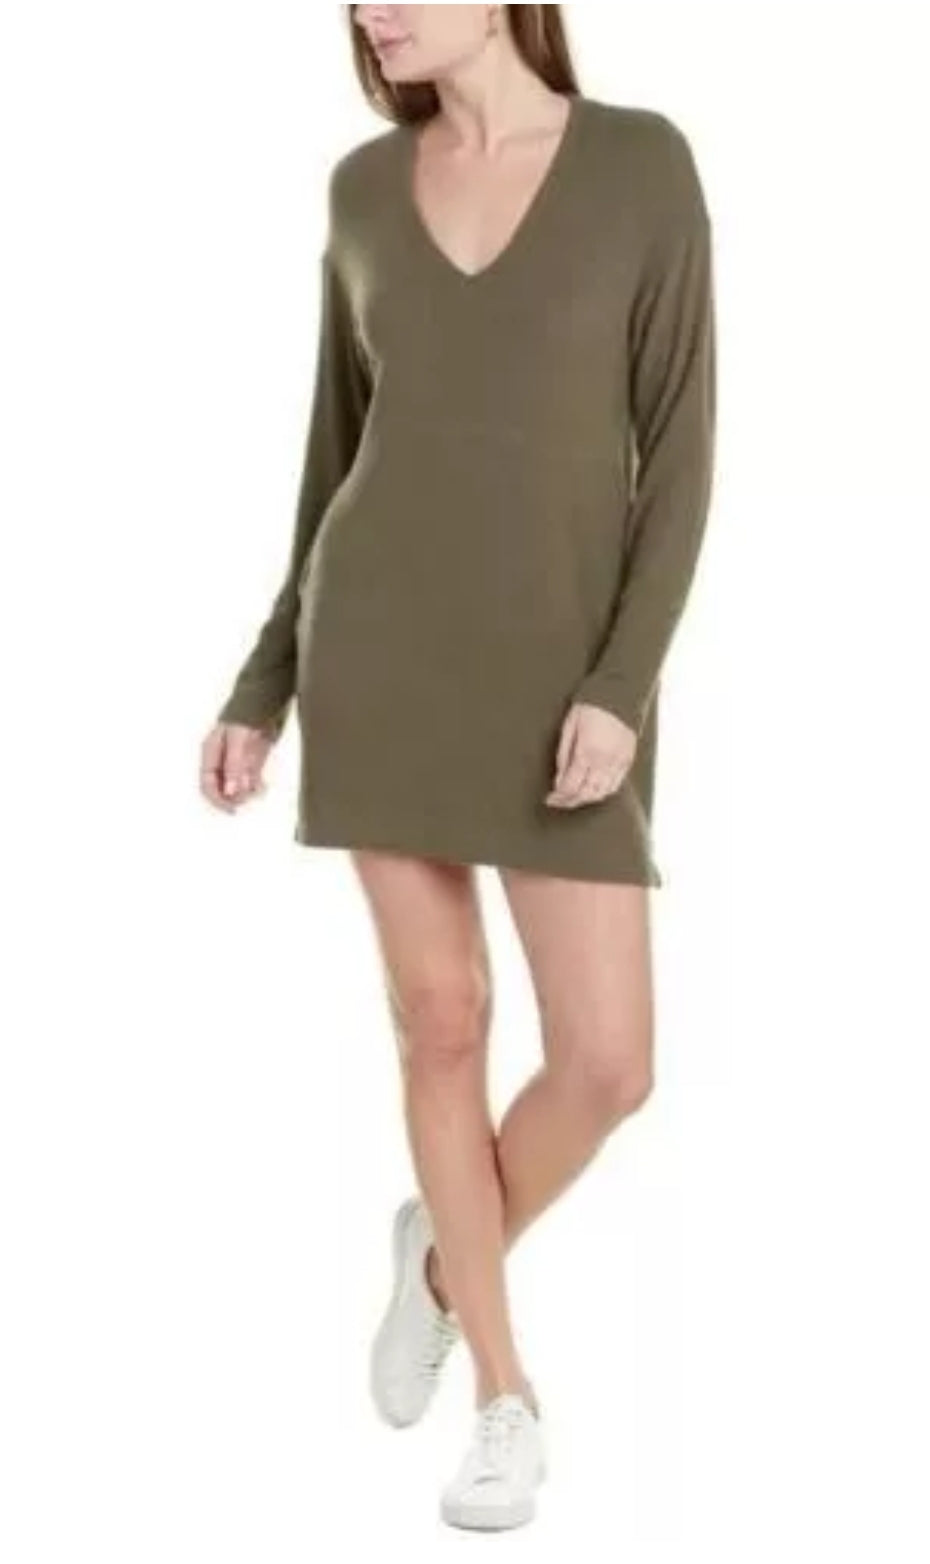 Soft knit construction adds a warm style to this long sleeve dress with relaxed drop shoulders S S Dresses by Brands Overstock | Brands Overstock